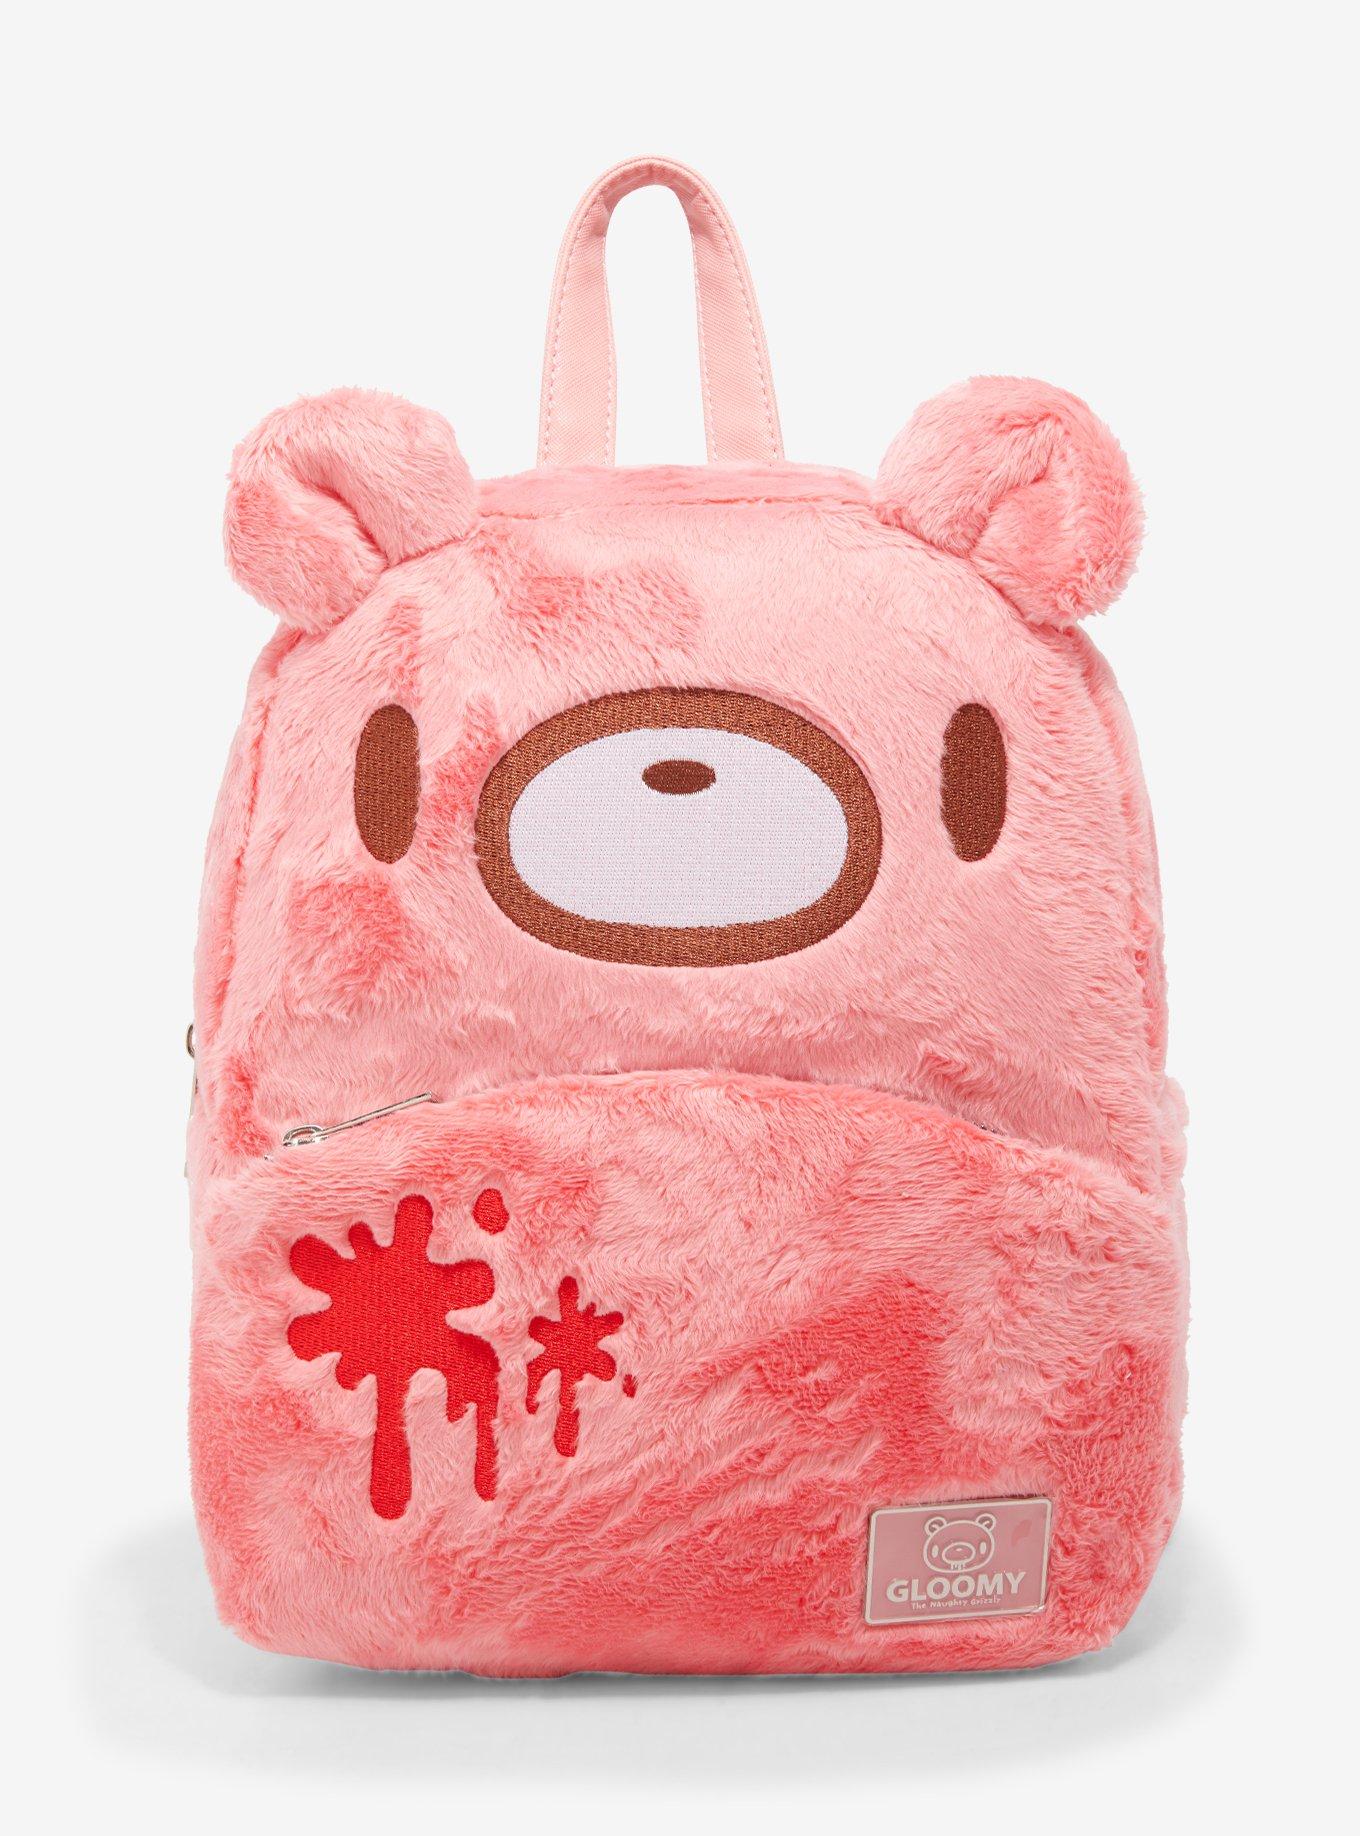 25 Bags You Forgot You Were Obsessed With  Animal backpacks, Plush bags,  Animal bag